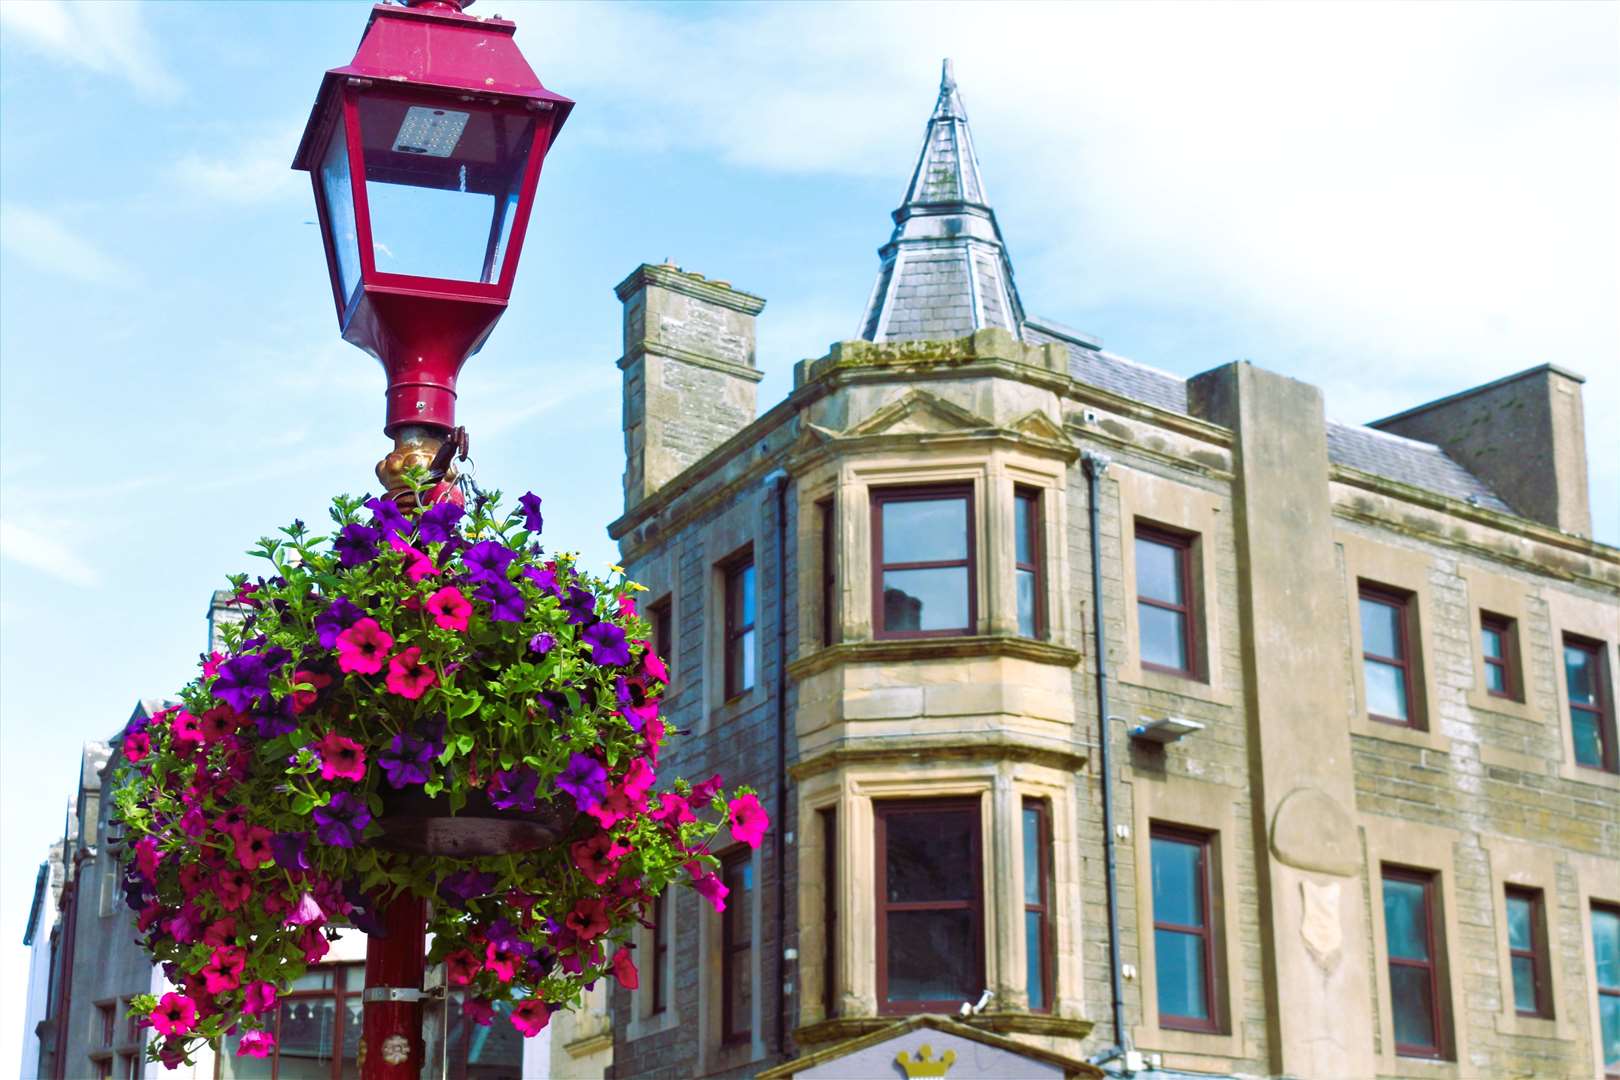 Wick Flowers Group has made a difference to the town with its colourful planters and baskets.